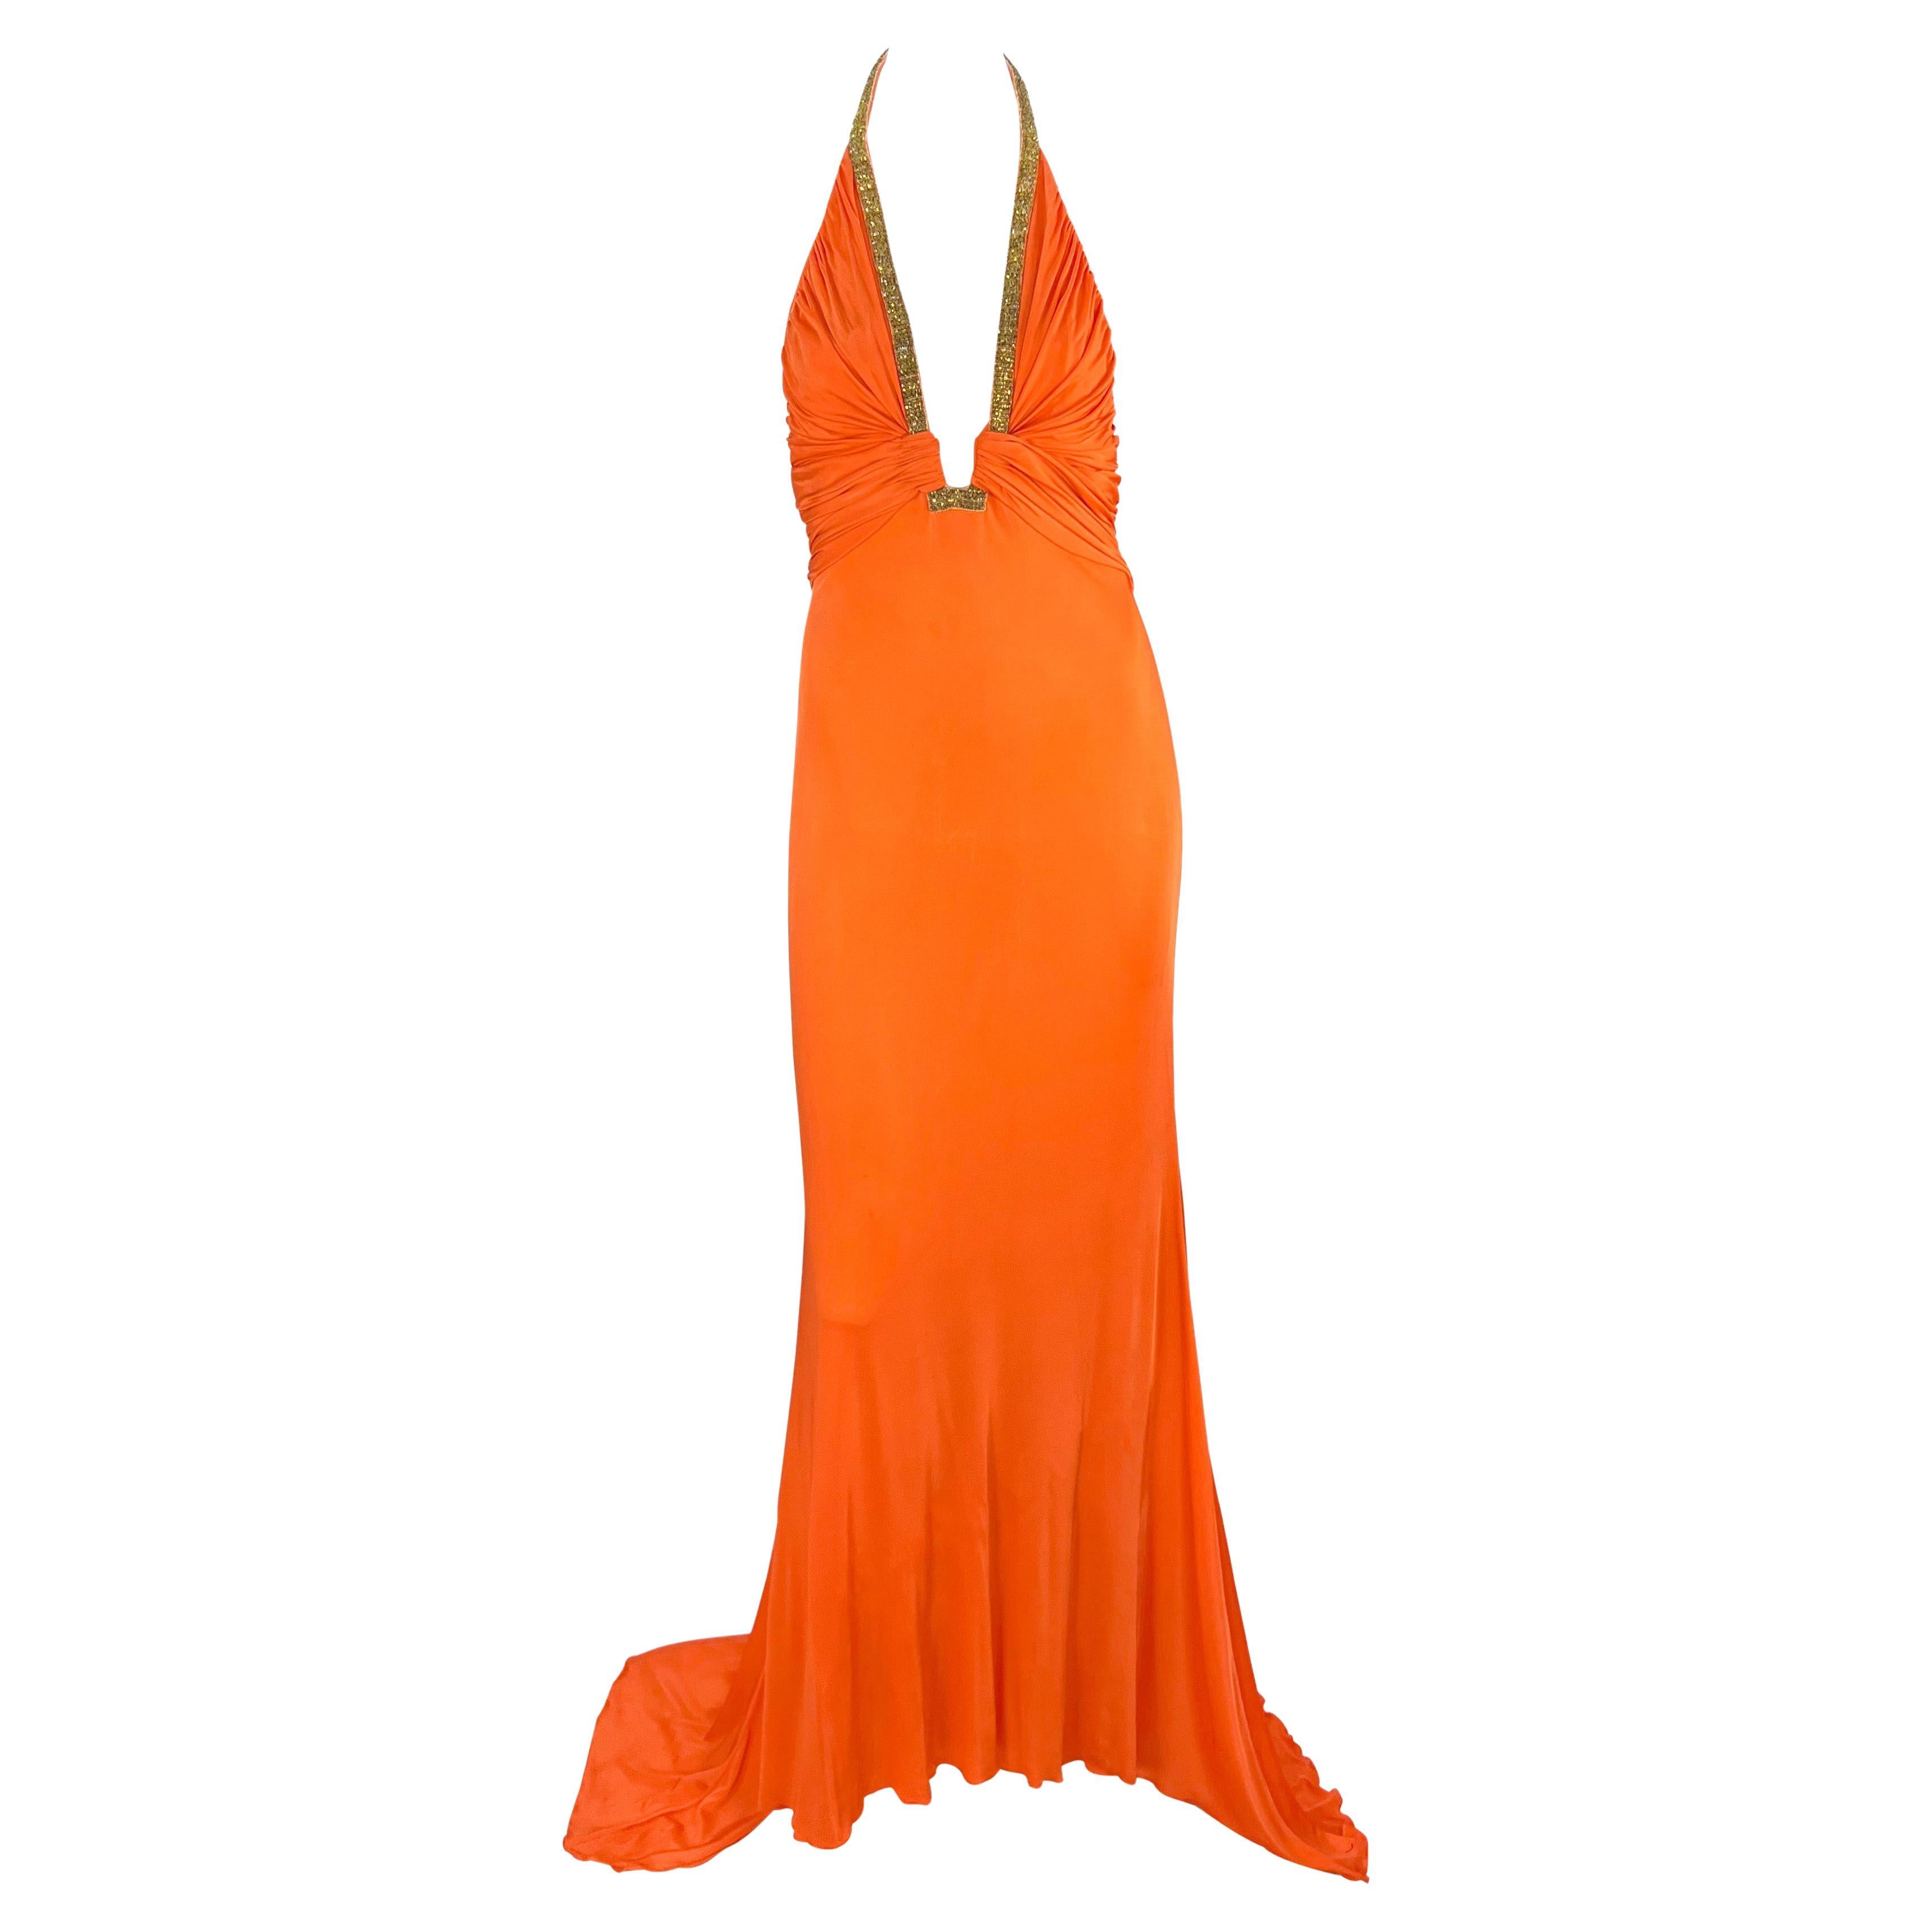 S/S 2005 Roberto Cavalli Backless Orange Bodycon Gold Sequin Plunging Gown For Sale